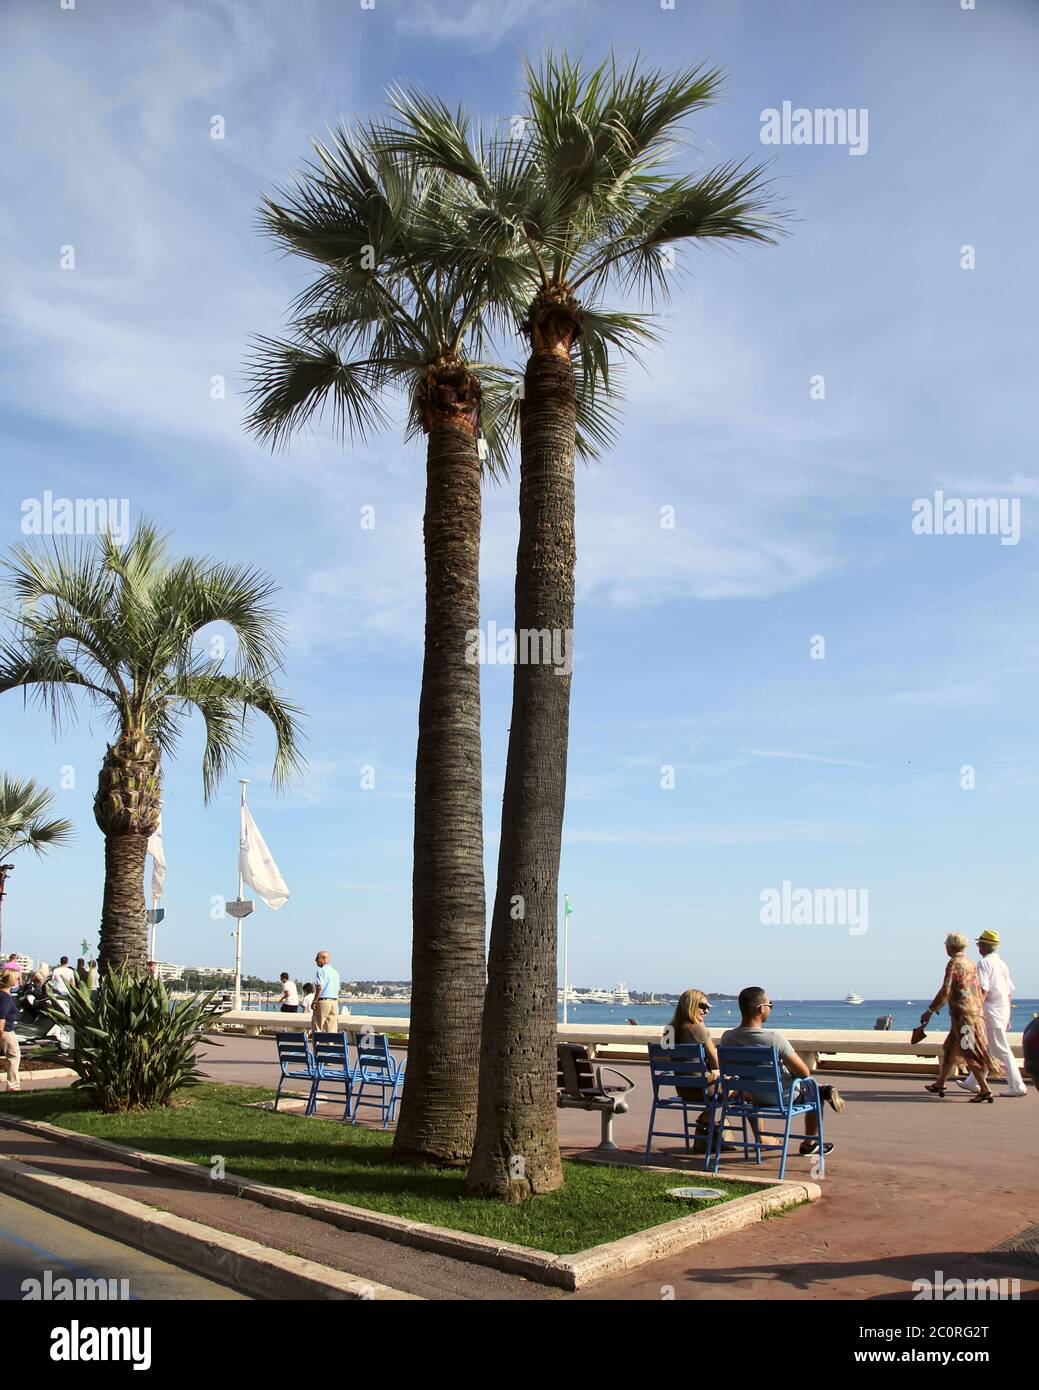 CANNES, FRANCE -  JULY 5, 2014. Palm trees on the Croisette in Cannes city. Cannes located in the French Riviera. The city is fa Stock Photo